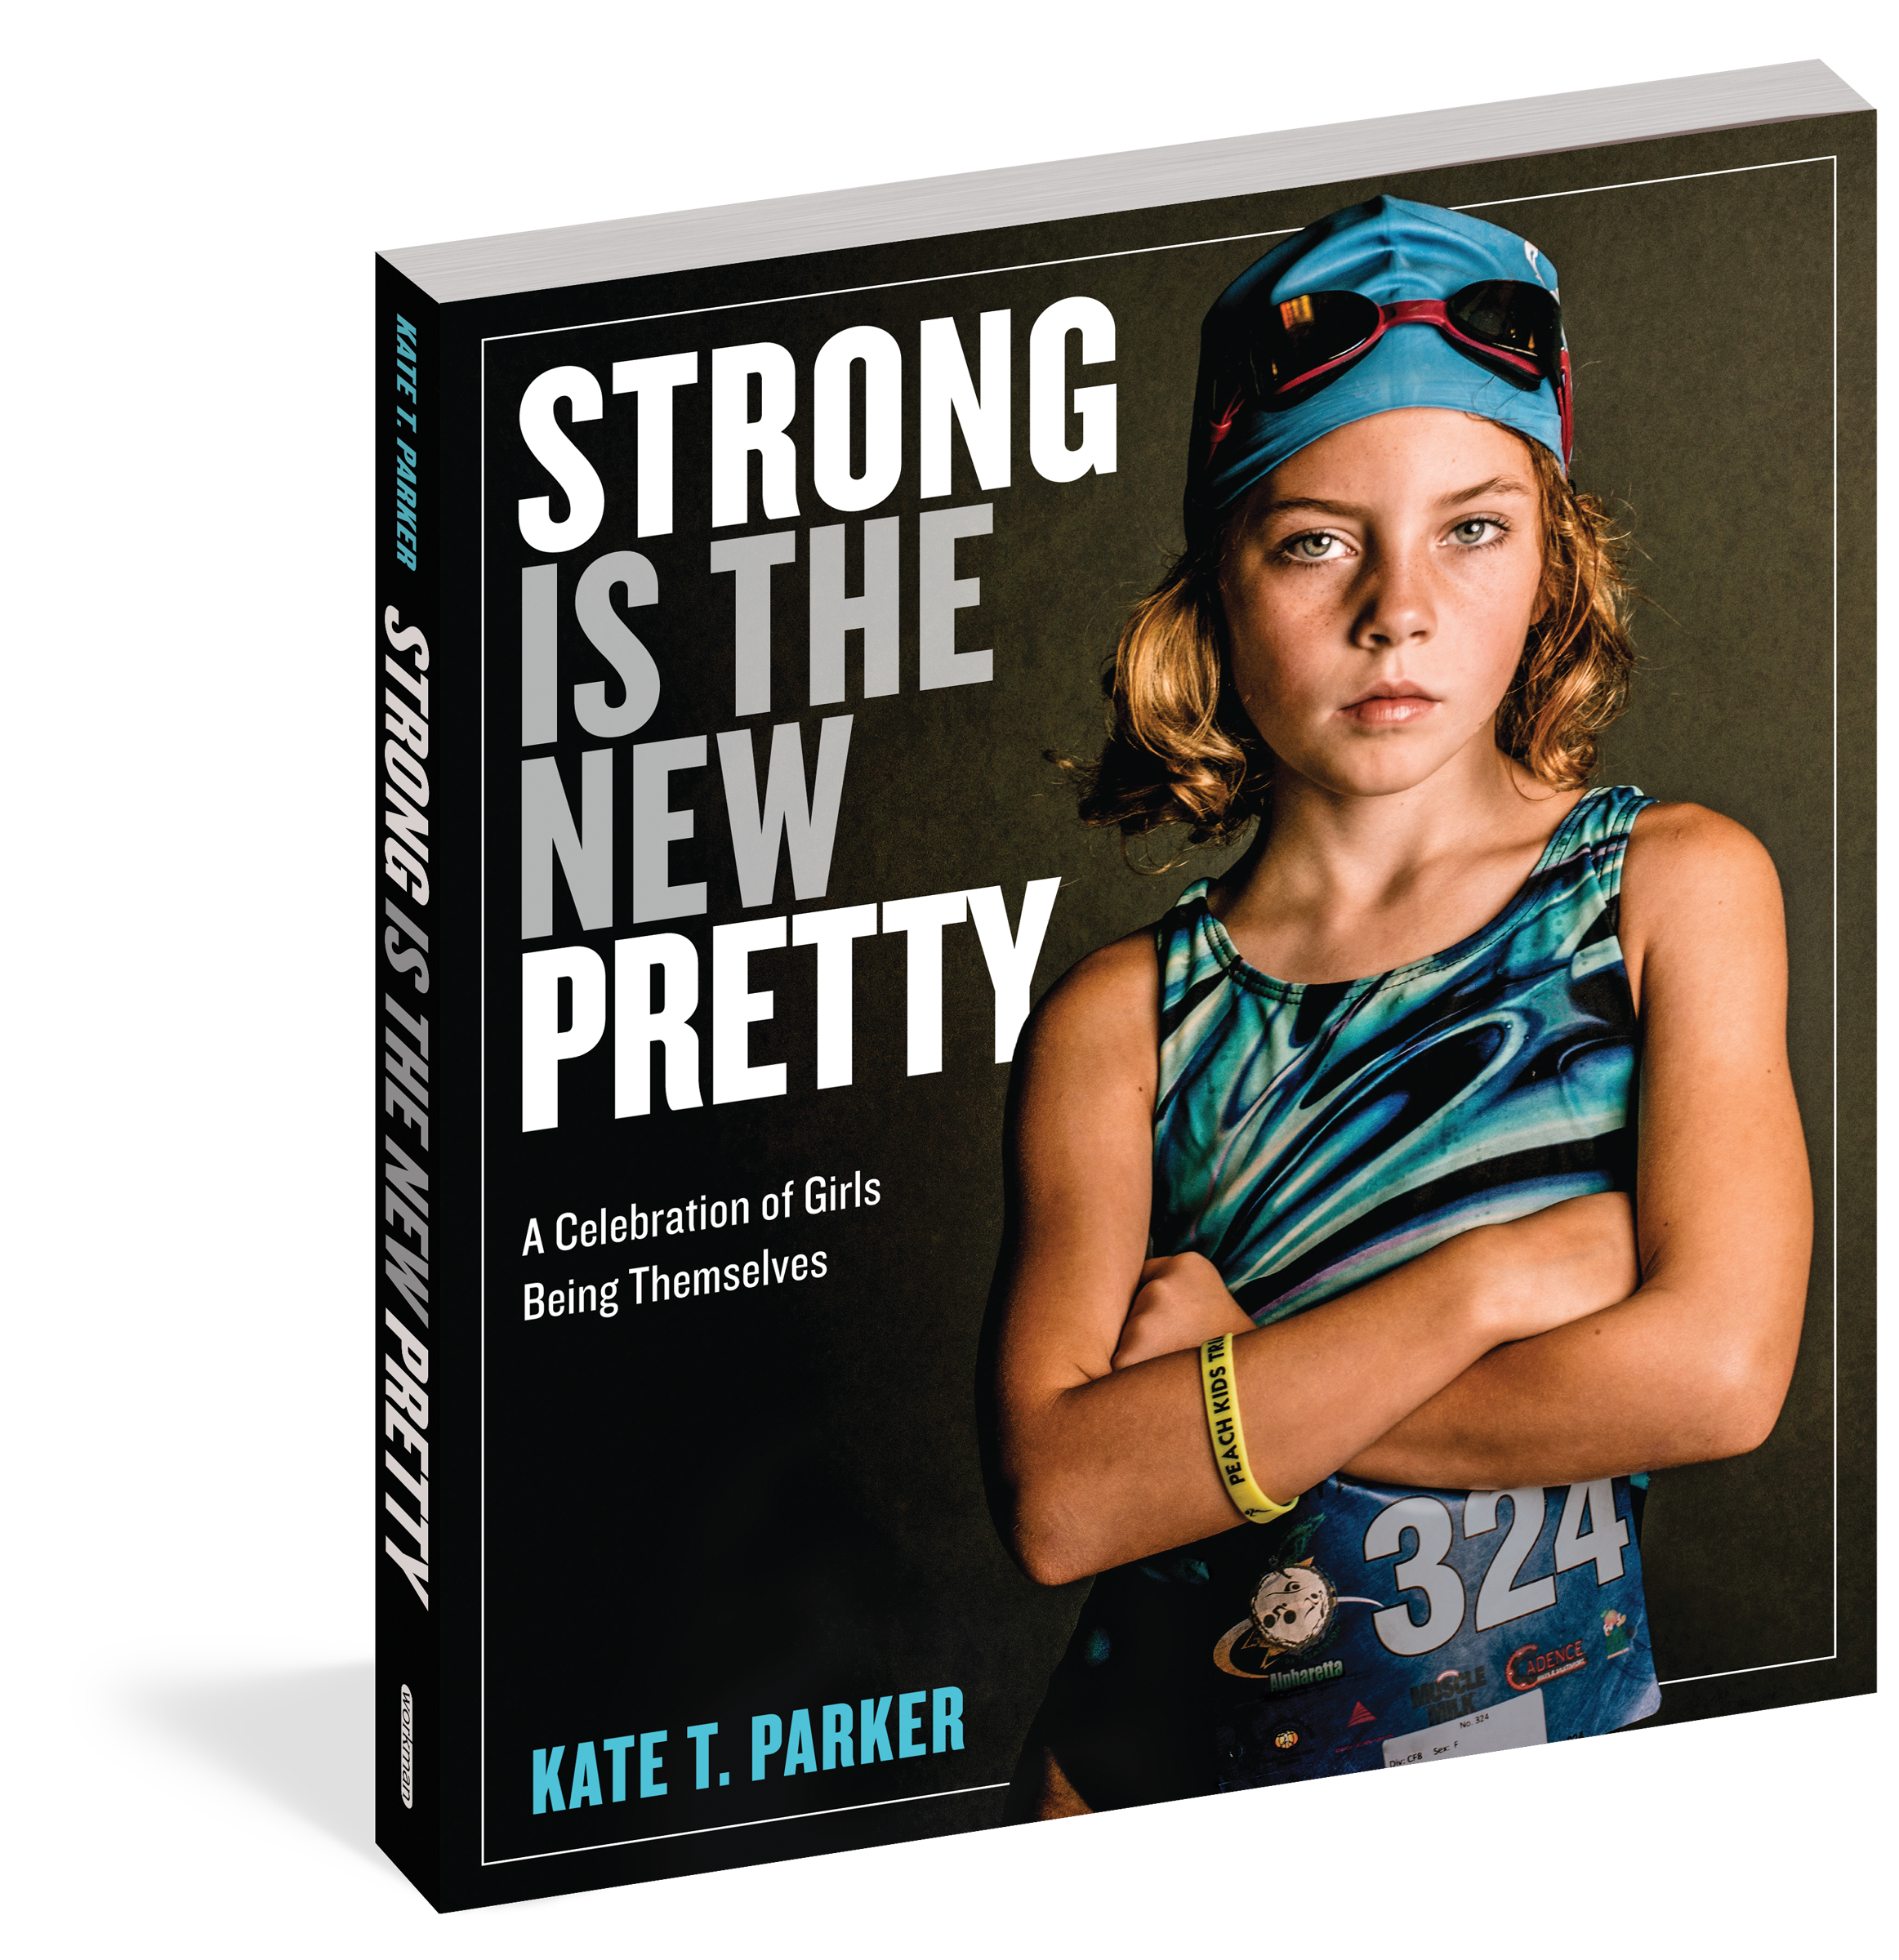 Strong Is The New Pretty - A Celebration of Girls Being Themselves    